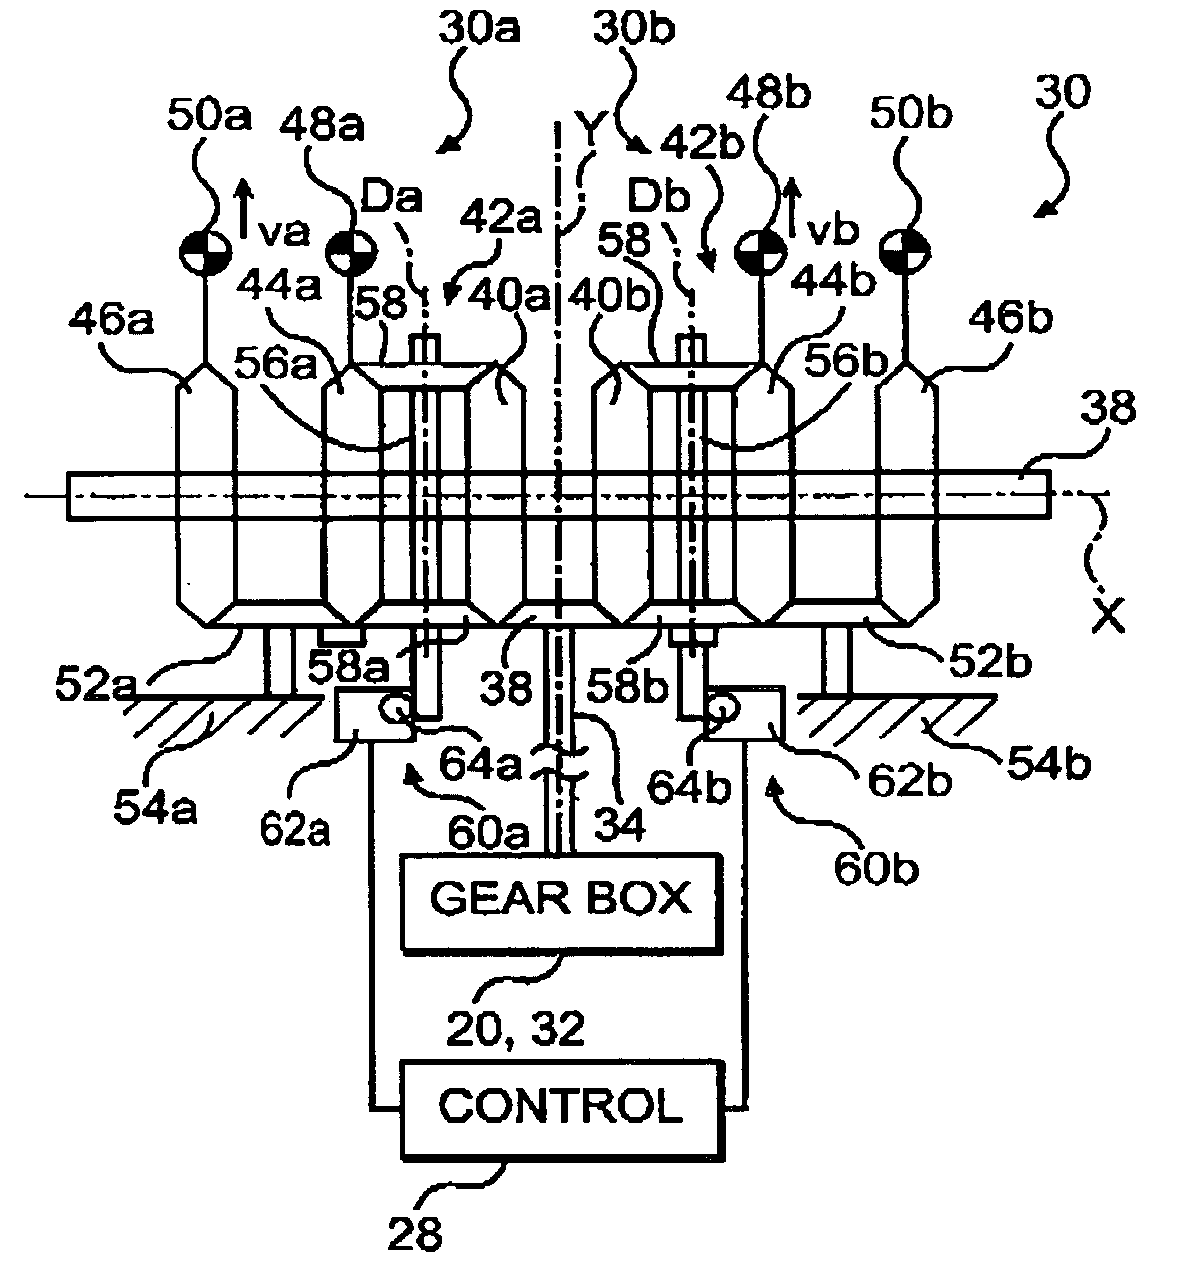 Gearbox mounted force generator